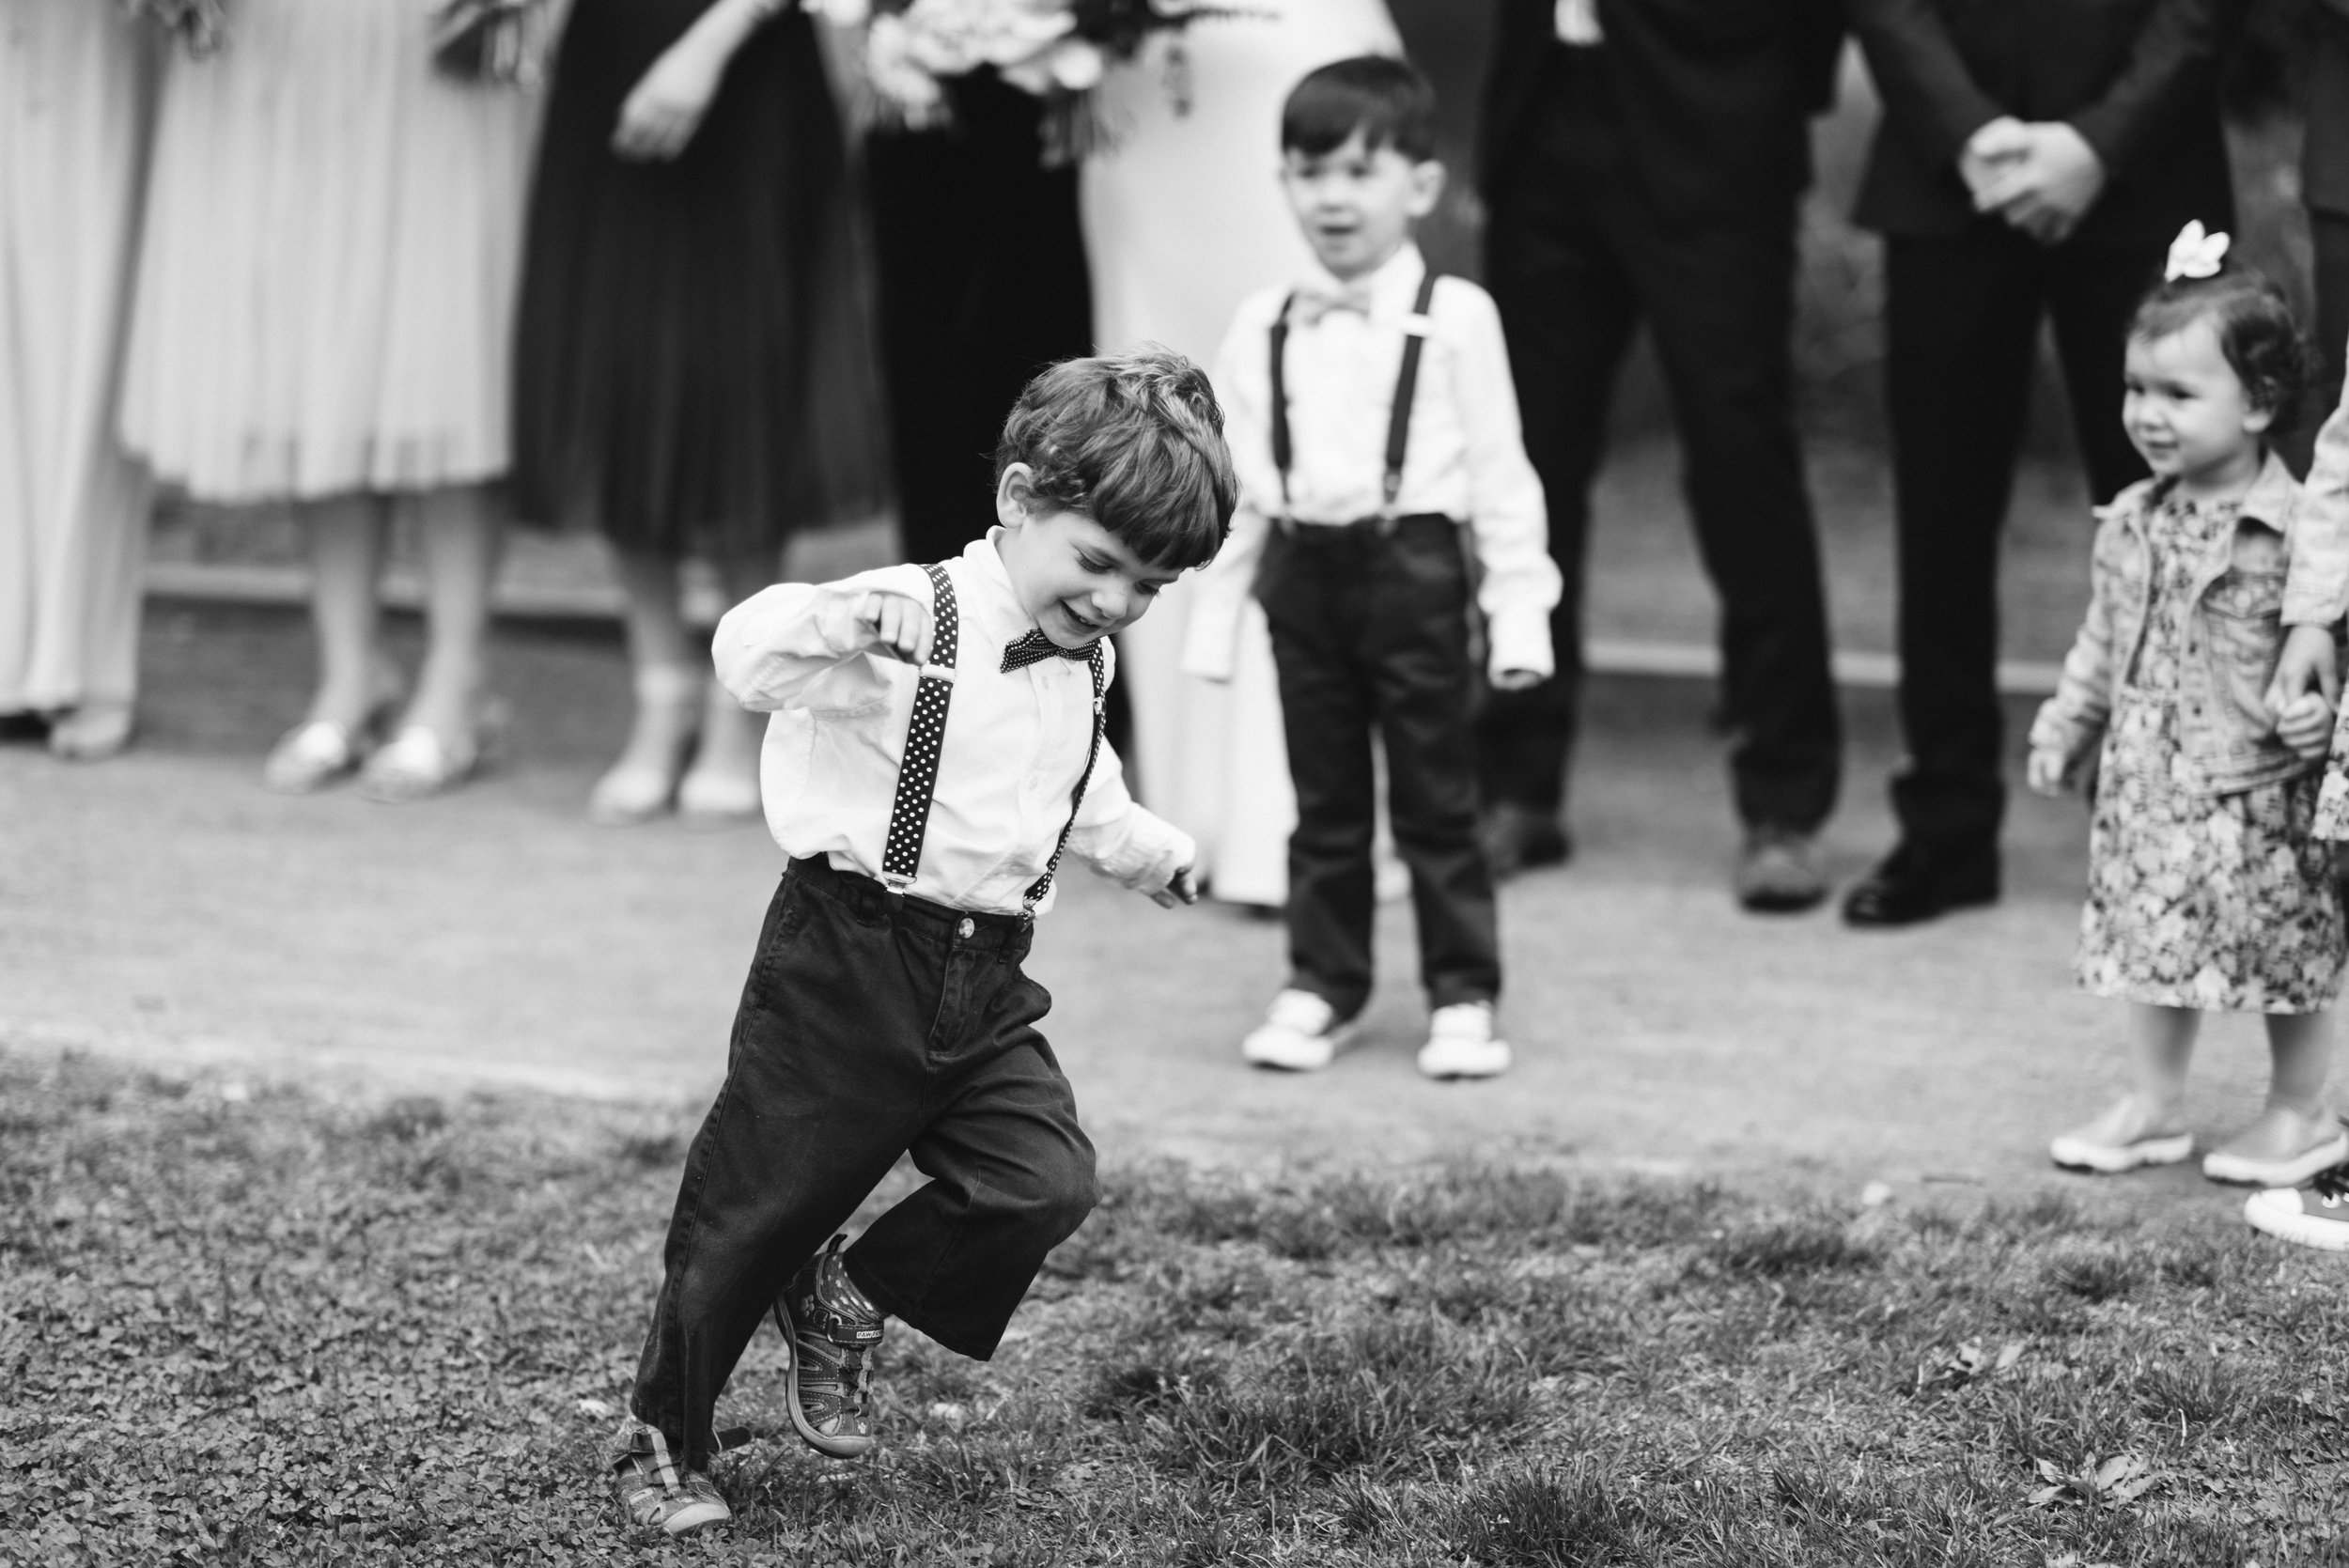  Washington DC, Maryland Wedding Photographer, Alexandria, Old Town, Jewel Tone, Romantic, Modern, Little boy in suspenders running the the park, Black and White Photo 